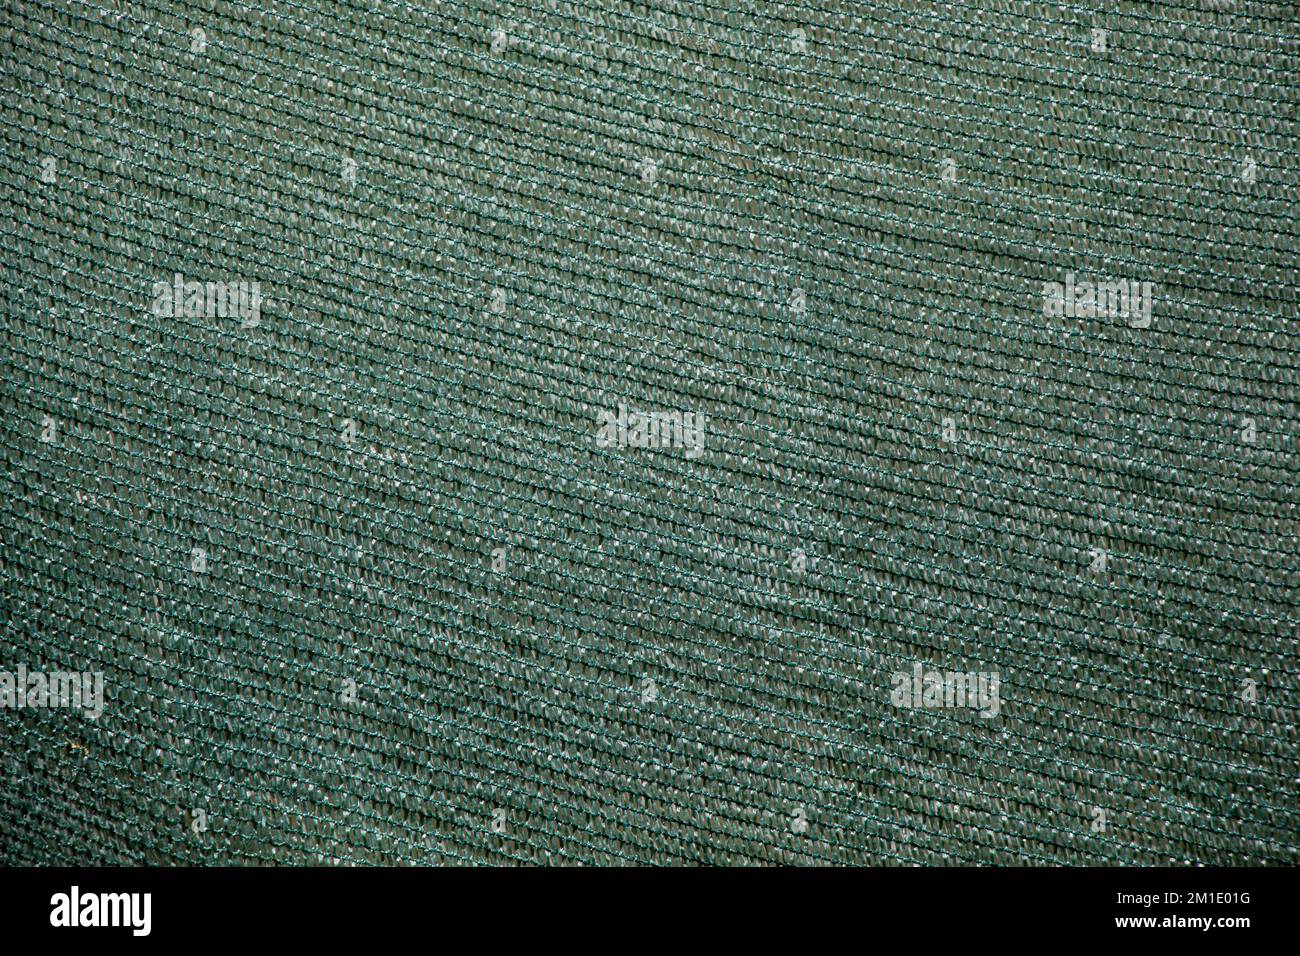 Fabric texture in view as a plain background Stock Photo